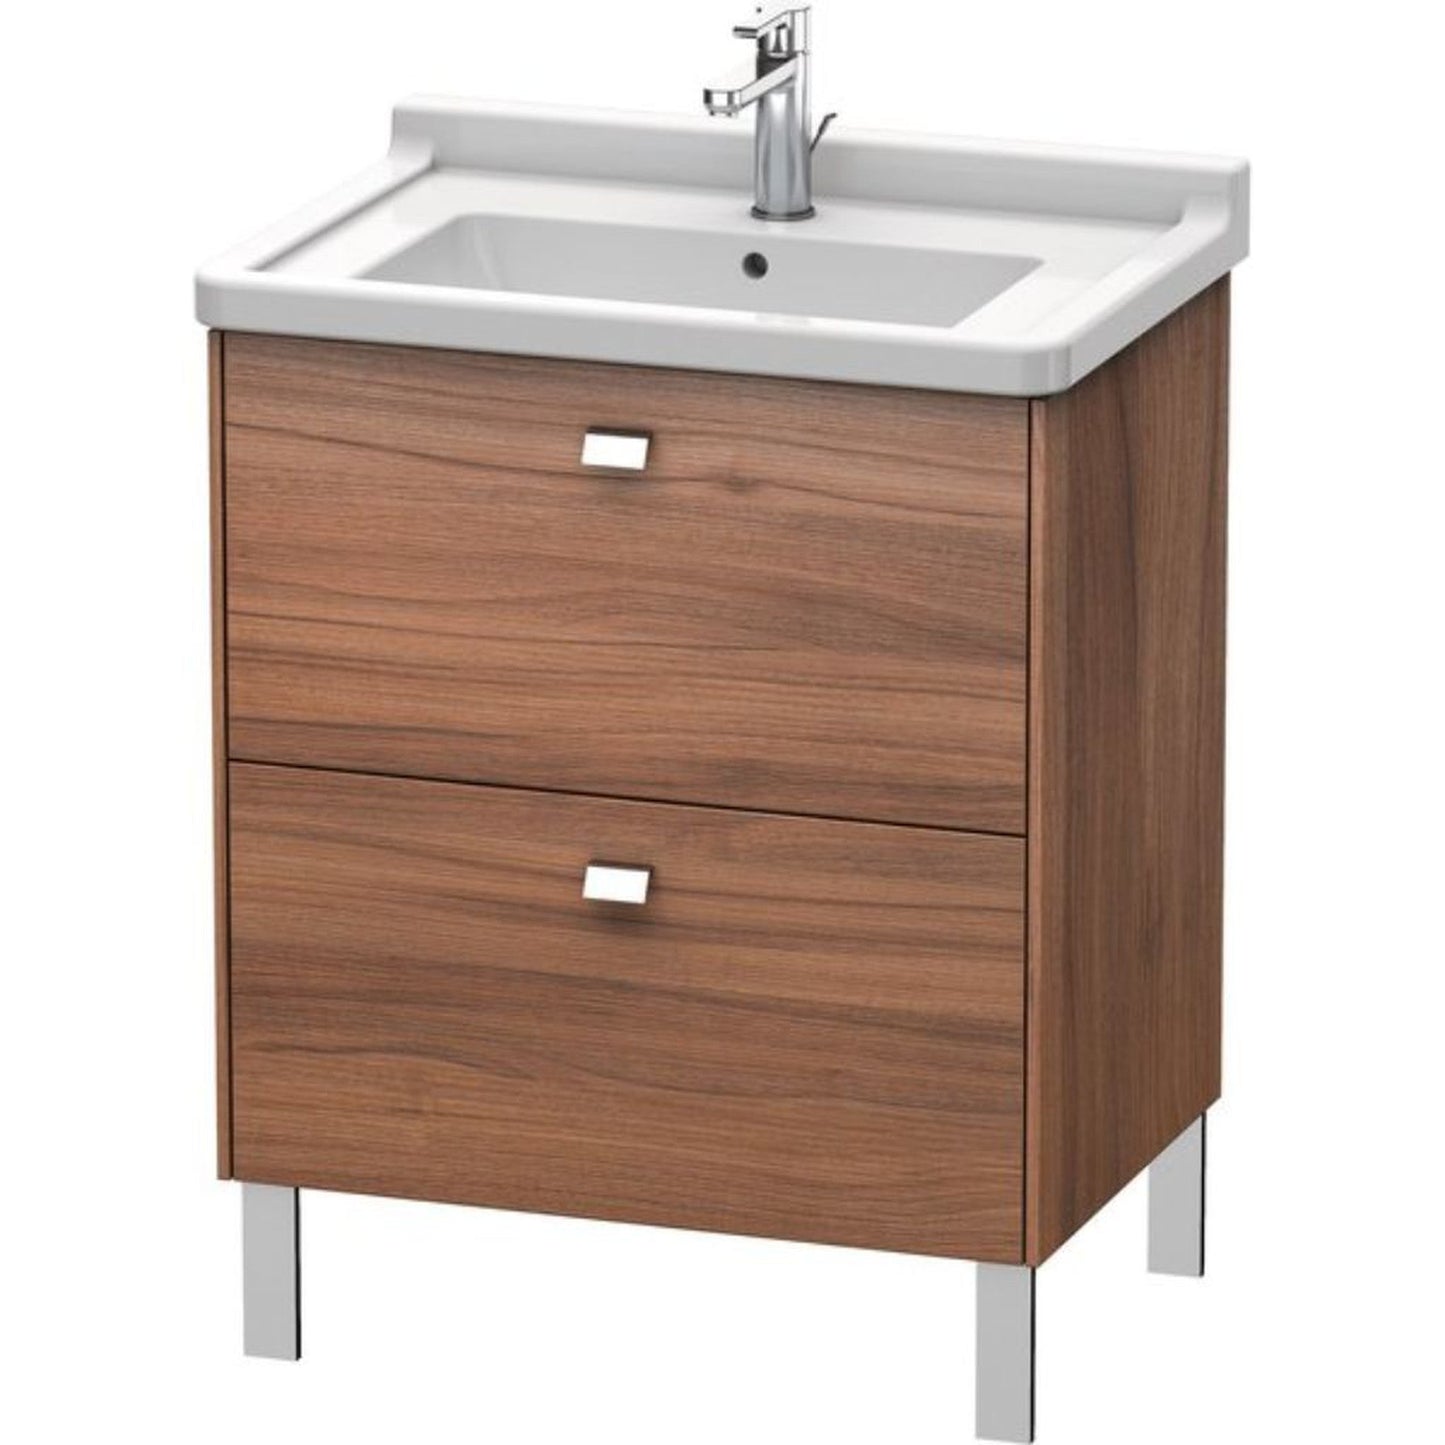 Duravit Brioso BR44210 26" x 27" x 18" Two Drawer Floor Standing Vanity Unit in Natural Walnut and Chrome Handle